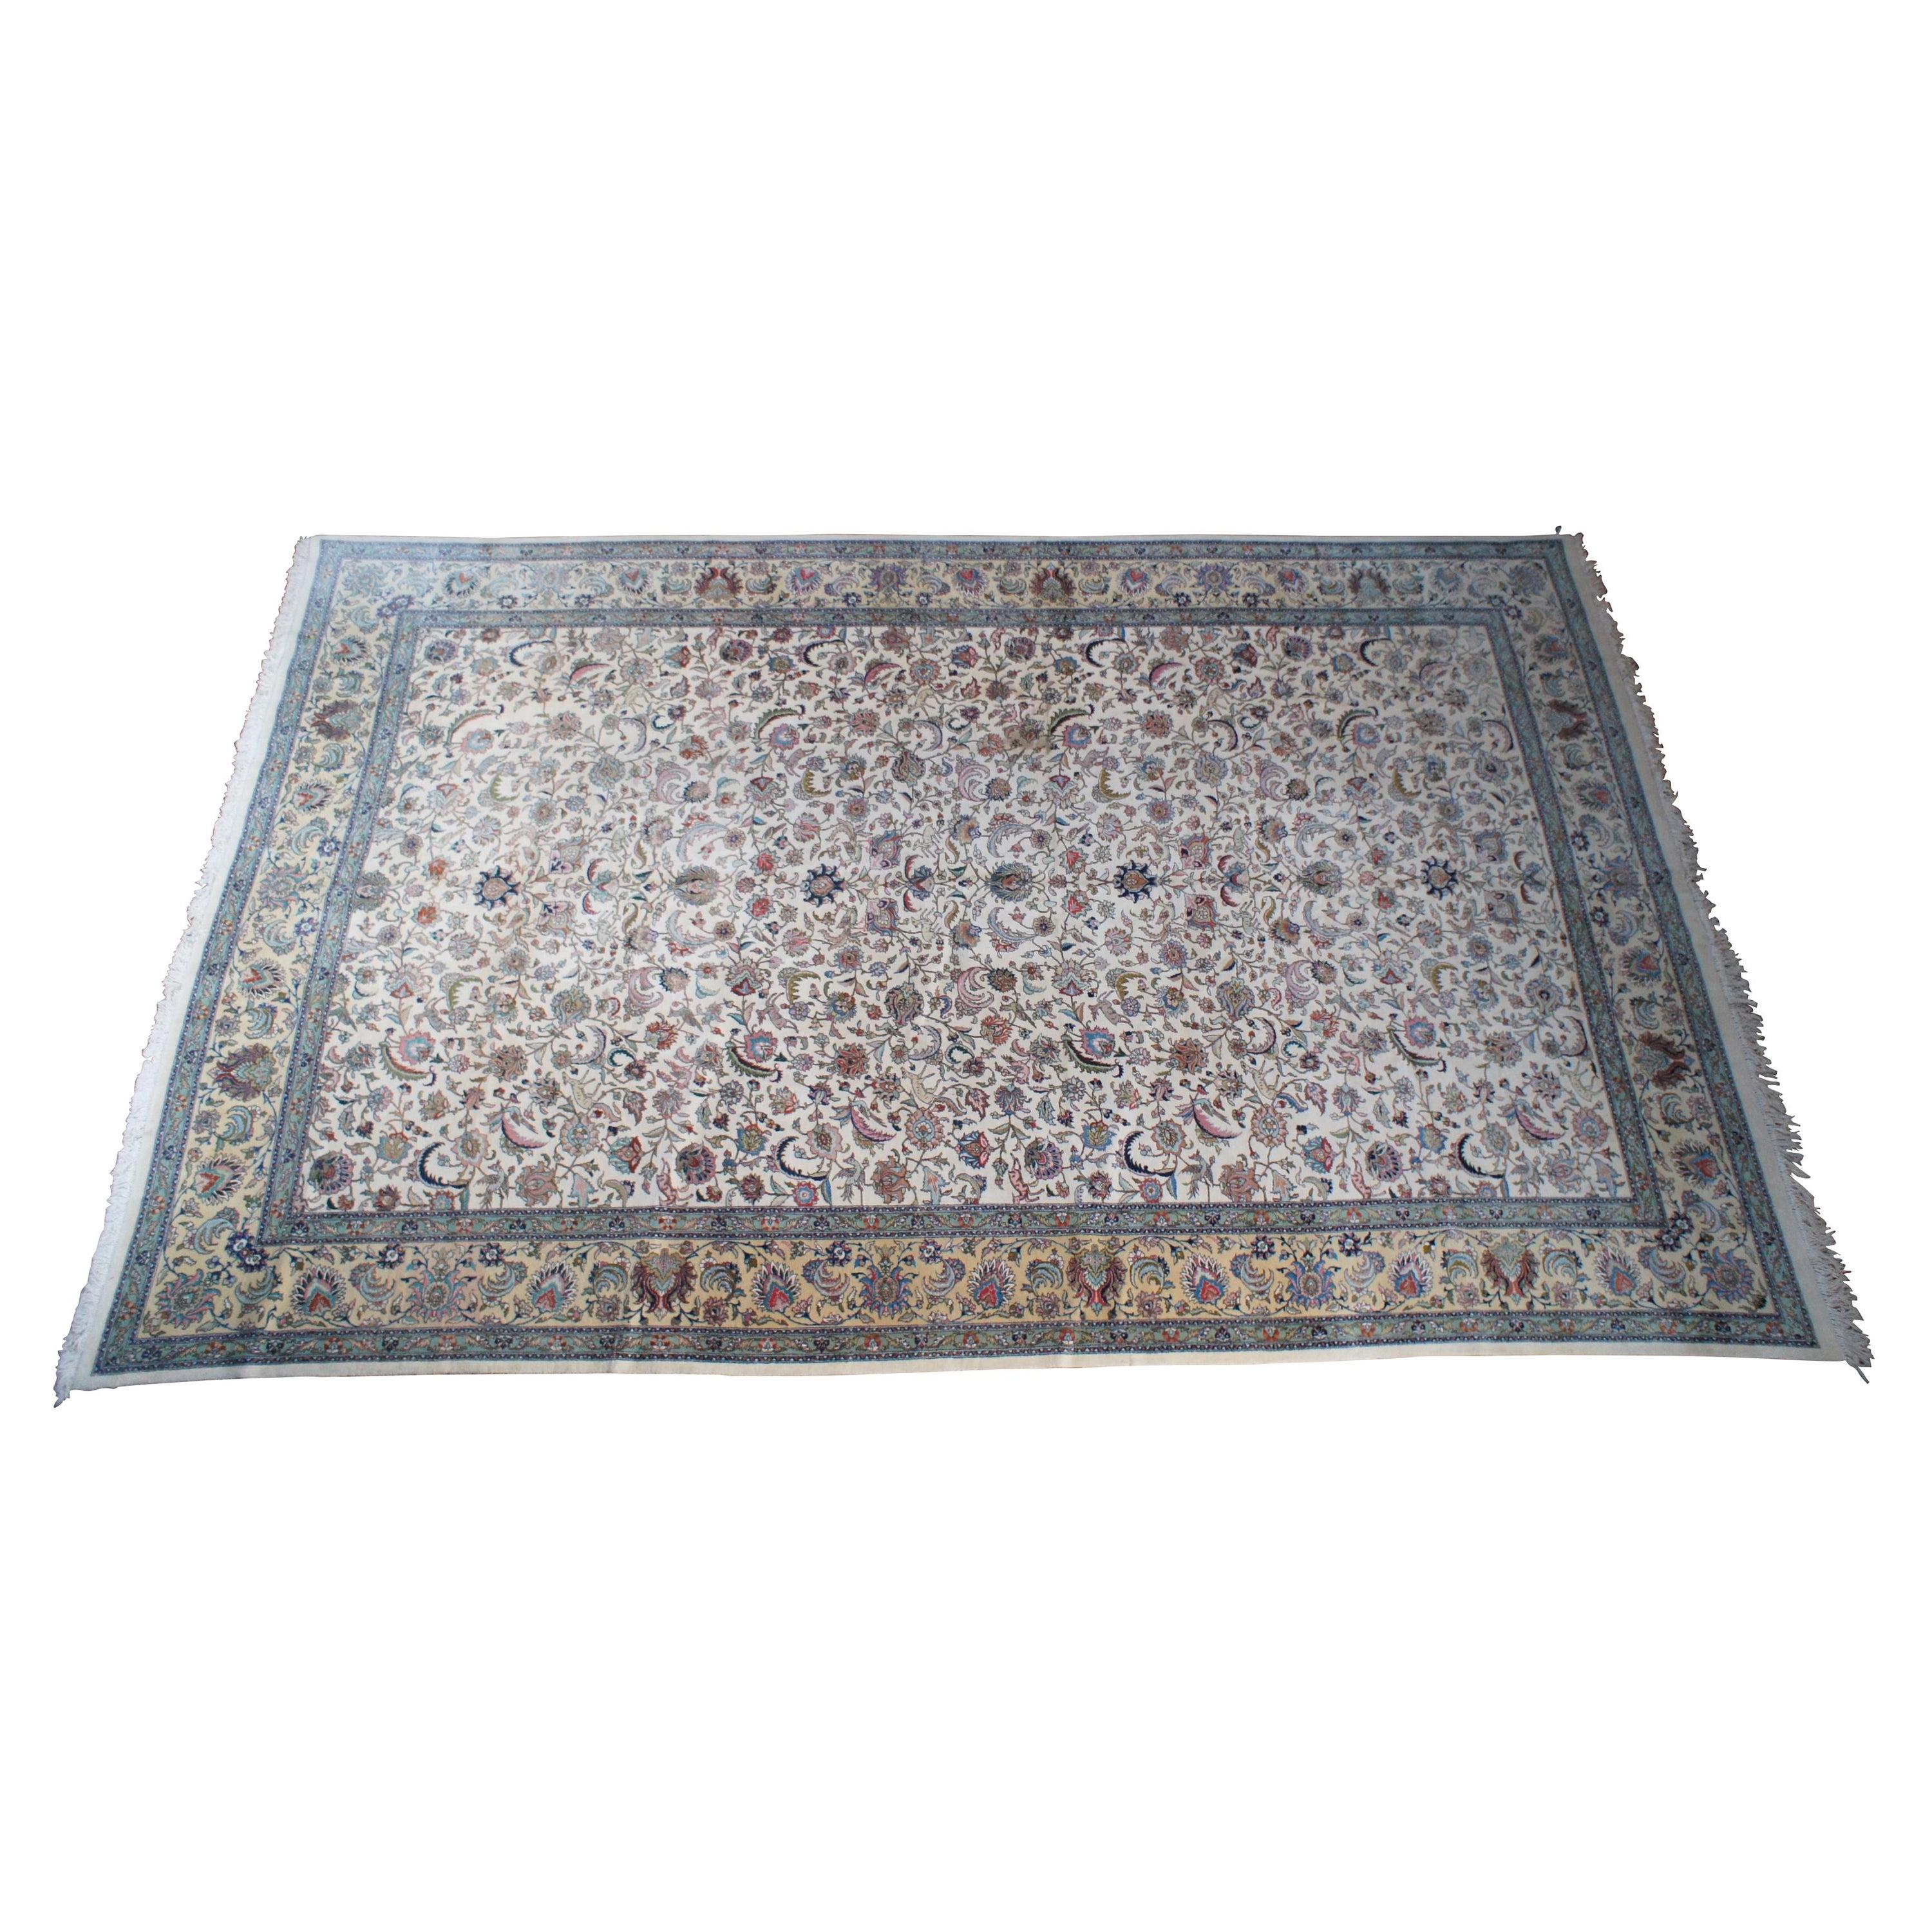 A large and impressive 100% wool pile area rug featuring a floral scene with animals (Deer, Birds) on a beige field with pinks, greens, browns, reds, tans, blues and greens.  

Located in the northwestern region of Iran, Tabriz is a city steeped in